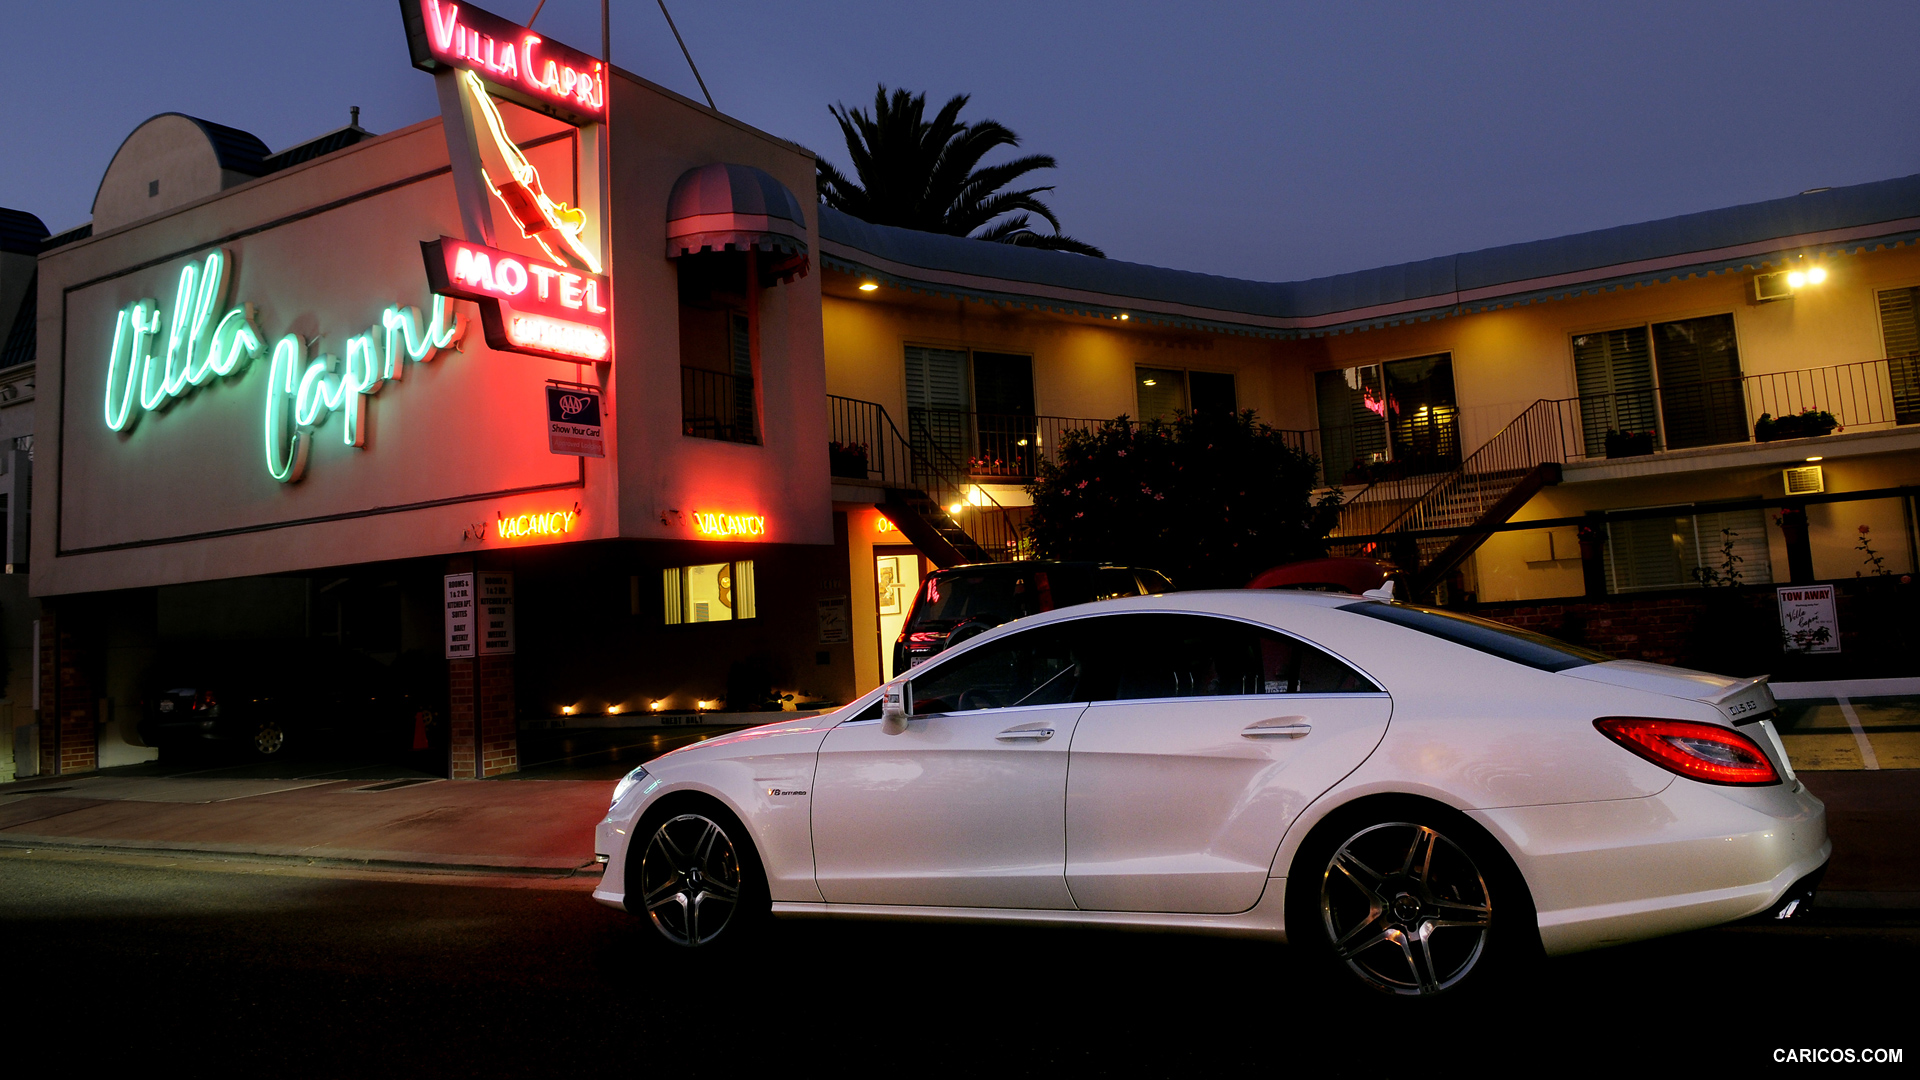 Mercedes-Benz CLS63 AMG (2012) US-Version - Diamond White - Side, #5 of 100